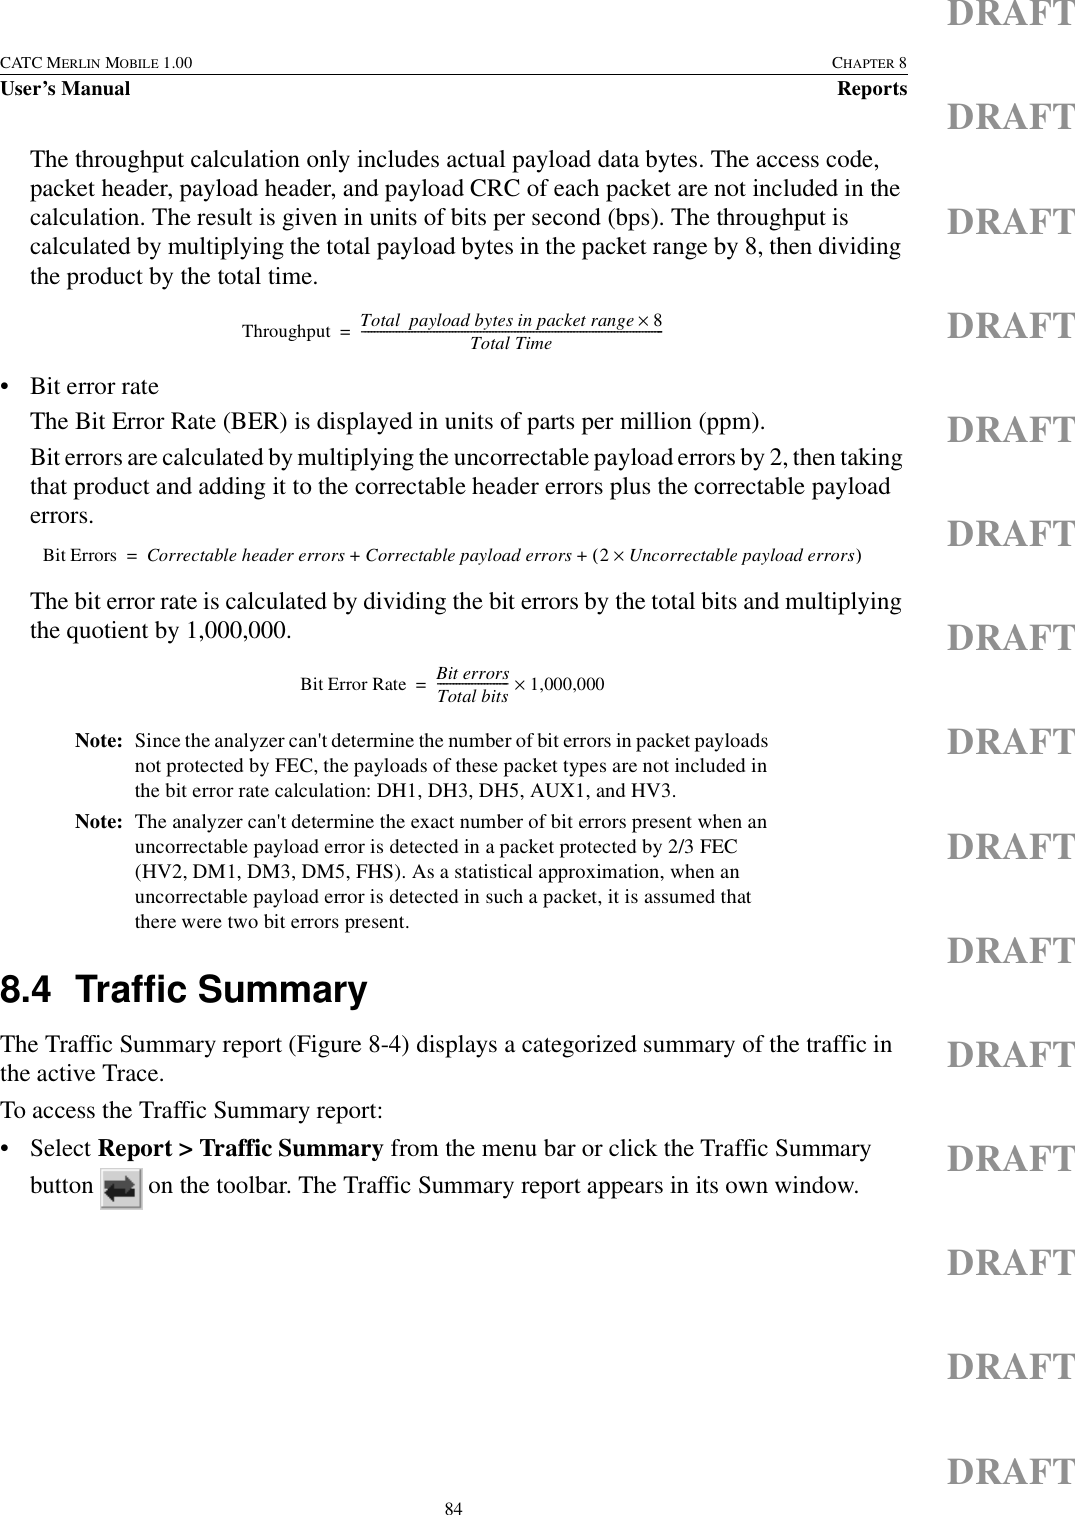 84CATC MERLIN MOBILE 1.00 CHAPTER 8User’s Manual ReportsDRAFTDRAFTDRAFTDRAFTDRAFTDRAFTDRAFTDRAFTDRAFTDRAFTDRAFTDRAFTDRAFTDRAFTDRAFTThe throughput calculation only includes actual payload data bytes. The access code, packet header, payload header, and payload CRC of each packet are not included in the calculation. The result is given in units of bits per second (bps). The throughput is calculated by multiplying the total payload bytes in the packet range by 8, then dividing the product by the total time.• Bit error rate The Bit Error Rate (BER) is displayed in units of parts per million (ppm). Bit errors are calculated by multiplying the uncorrectable payload errors by 2, then taking that product and adding it to the correctable header errors plus the correctable payload errors.The bit error rate is calculated by dividing the bit errors by the total bits and multiplying the quotient by 1,000,000.Note: Since the analyzer can&apos;t determine the number of bit errors in packet payloads not protected by FEC, the payloads of these packet types are not included in the bit error rate calculation: DH1, DH3, DH5, AUX1, and HV3.Note: The analyzer can&apos;t determine the exact number of bit errors present when an uncorrectable payload error is detected in a packet protected by 2/3 FEC (HV2, DM1, DM3, DM5, FHS). As a statistical approximation, when an uncorrectable payload error is detected in such a packet, it is assumed that there were two bit errors present.8.4 Traffic SummaryThe Traffic Summary report (Figure 8-4) displays a categorized summary of the traffic in the active Trace.To access the Traffic Summary report:• Select Report &gt; Traffic Summary from the menu bar or click the Traffic Summary button   on the toolbar. The Traffic Summary report appears in its own window.Throughput Total  payload bytes in packet range 8×Total Time-------------------------------------------------------------------------------------------------=Bit Errors Correctable header errors Correctable payload errors 2Uncorrectable payload errors×()++=Bit Error Rate Bit errorsTotal bits-----------------------1,000,000×=